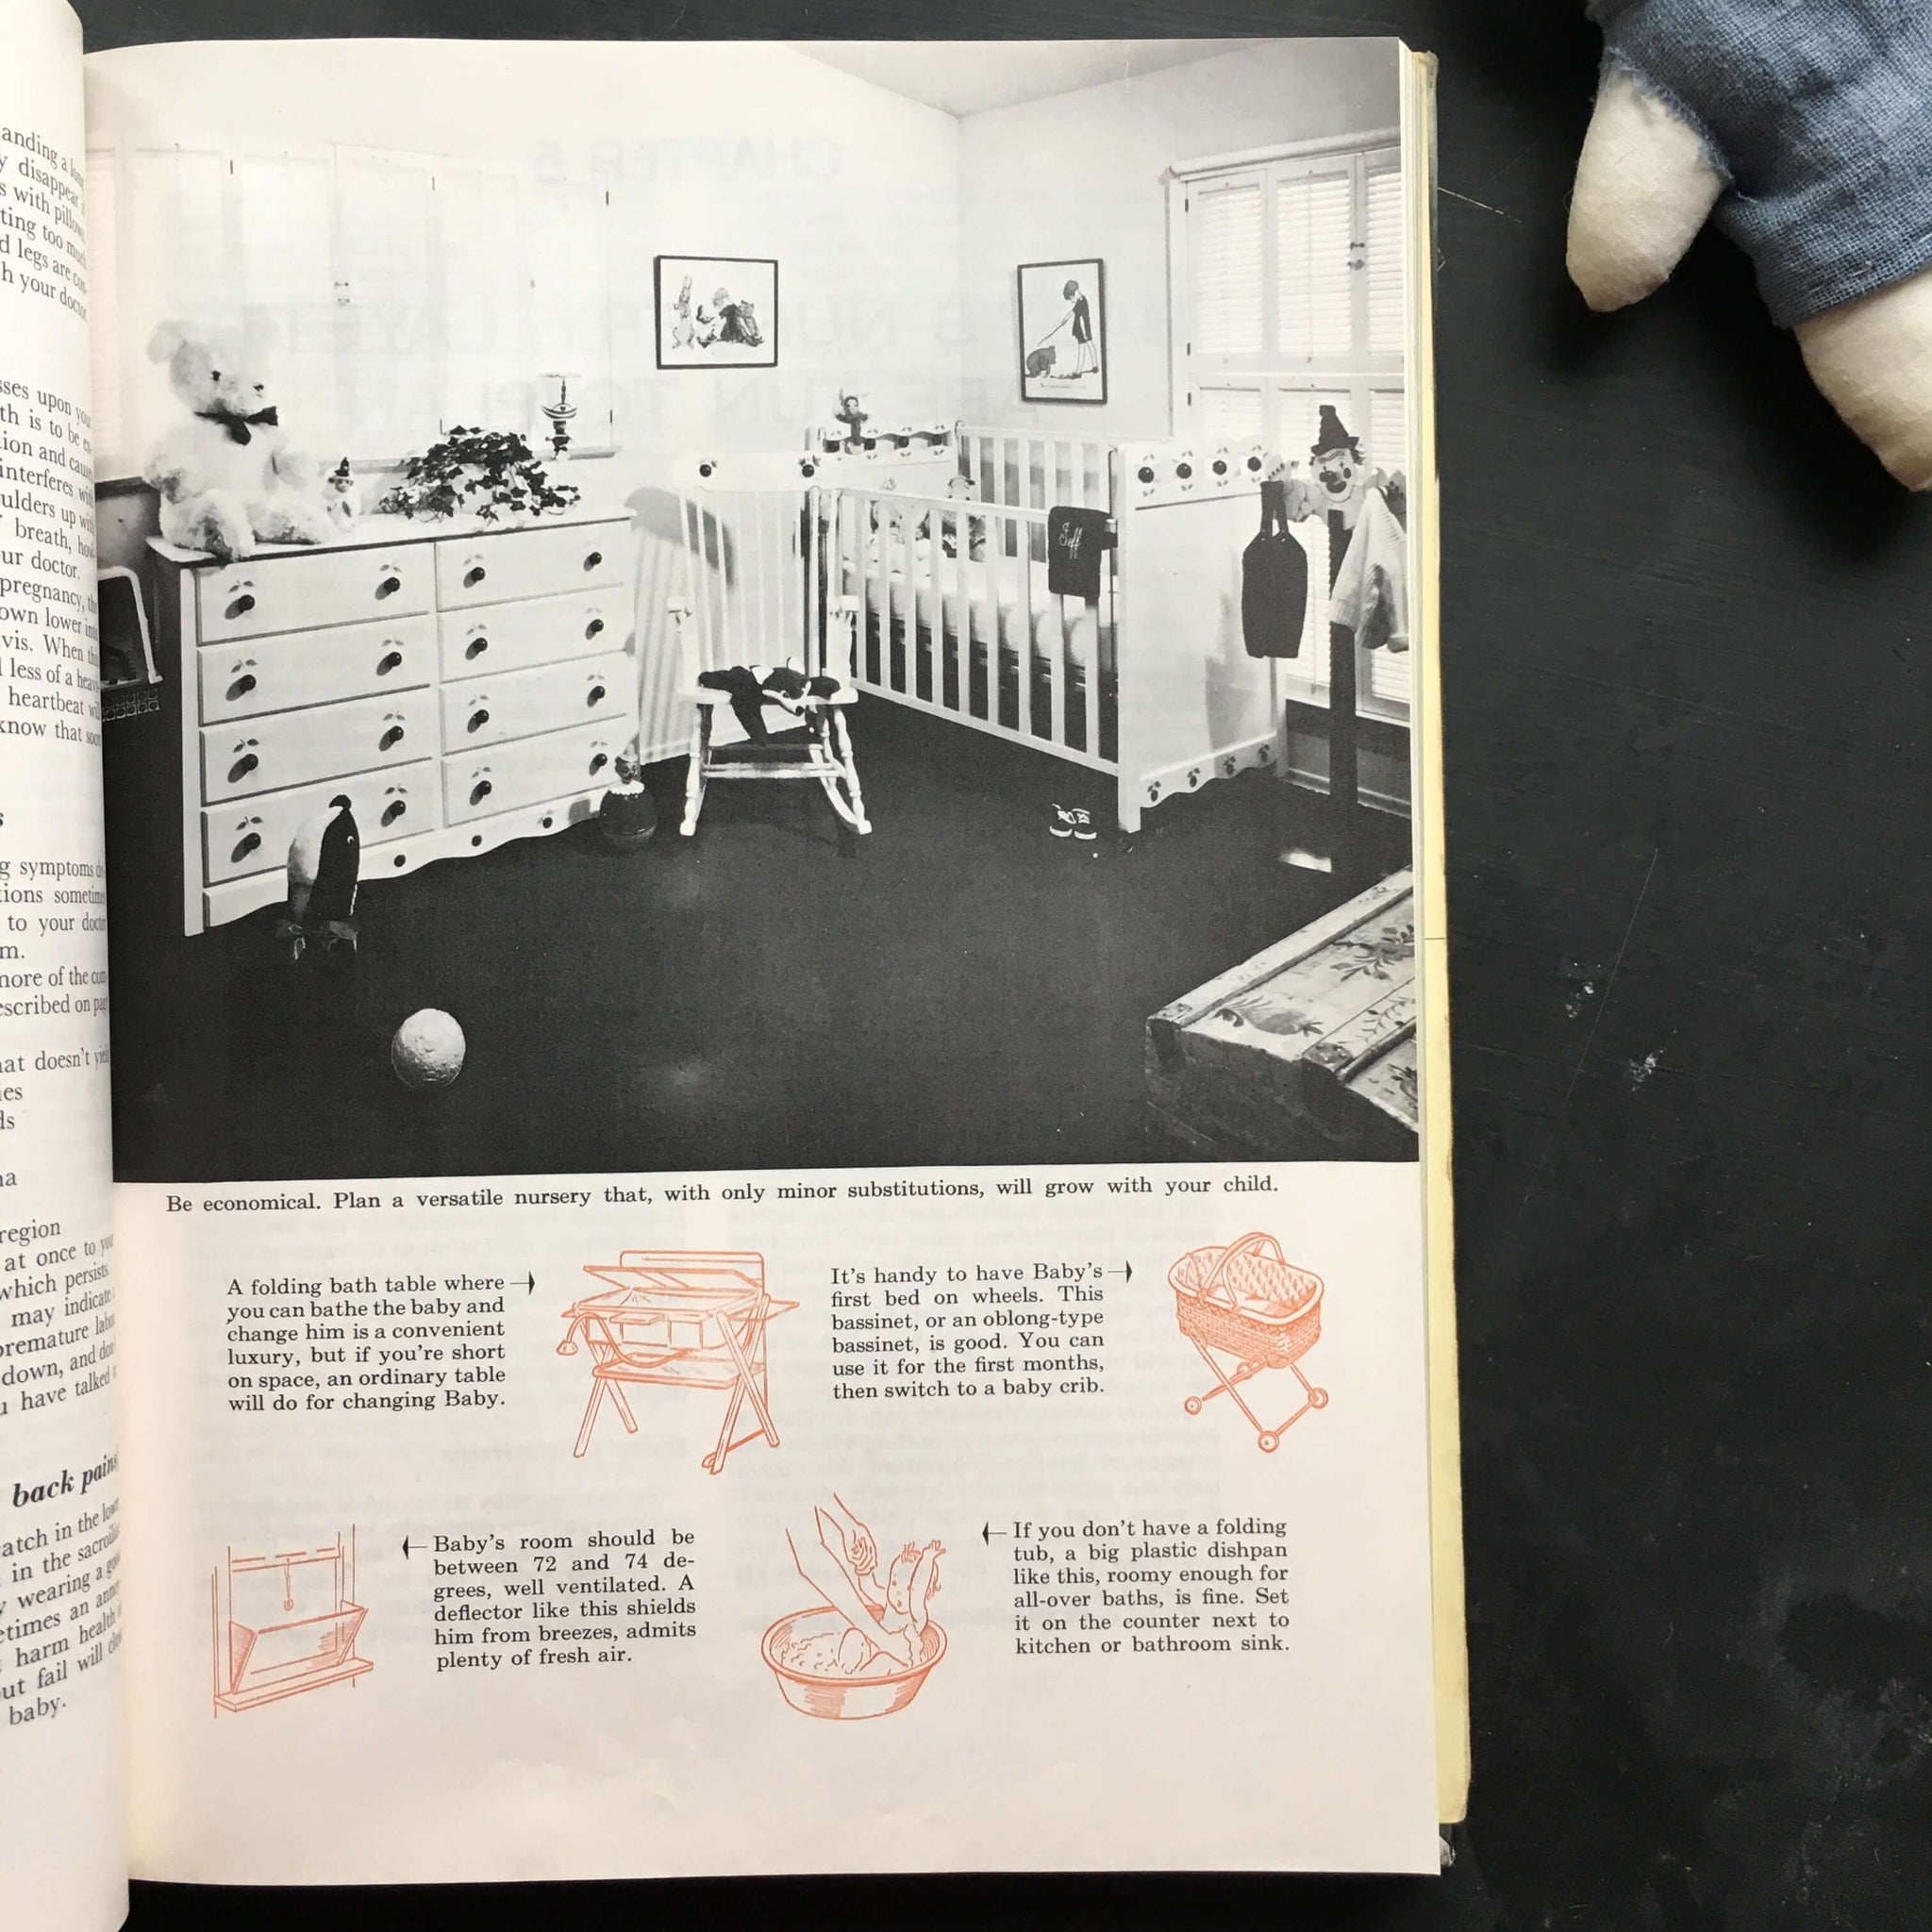 Better Homes and Gardens Baby Book - 1973 Edition, Fifth Printing, Fifth Ed. of 1969 Reprint